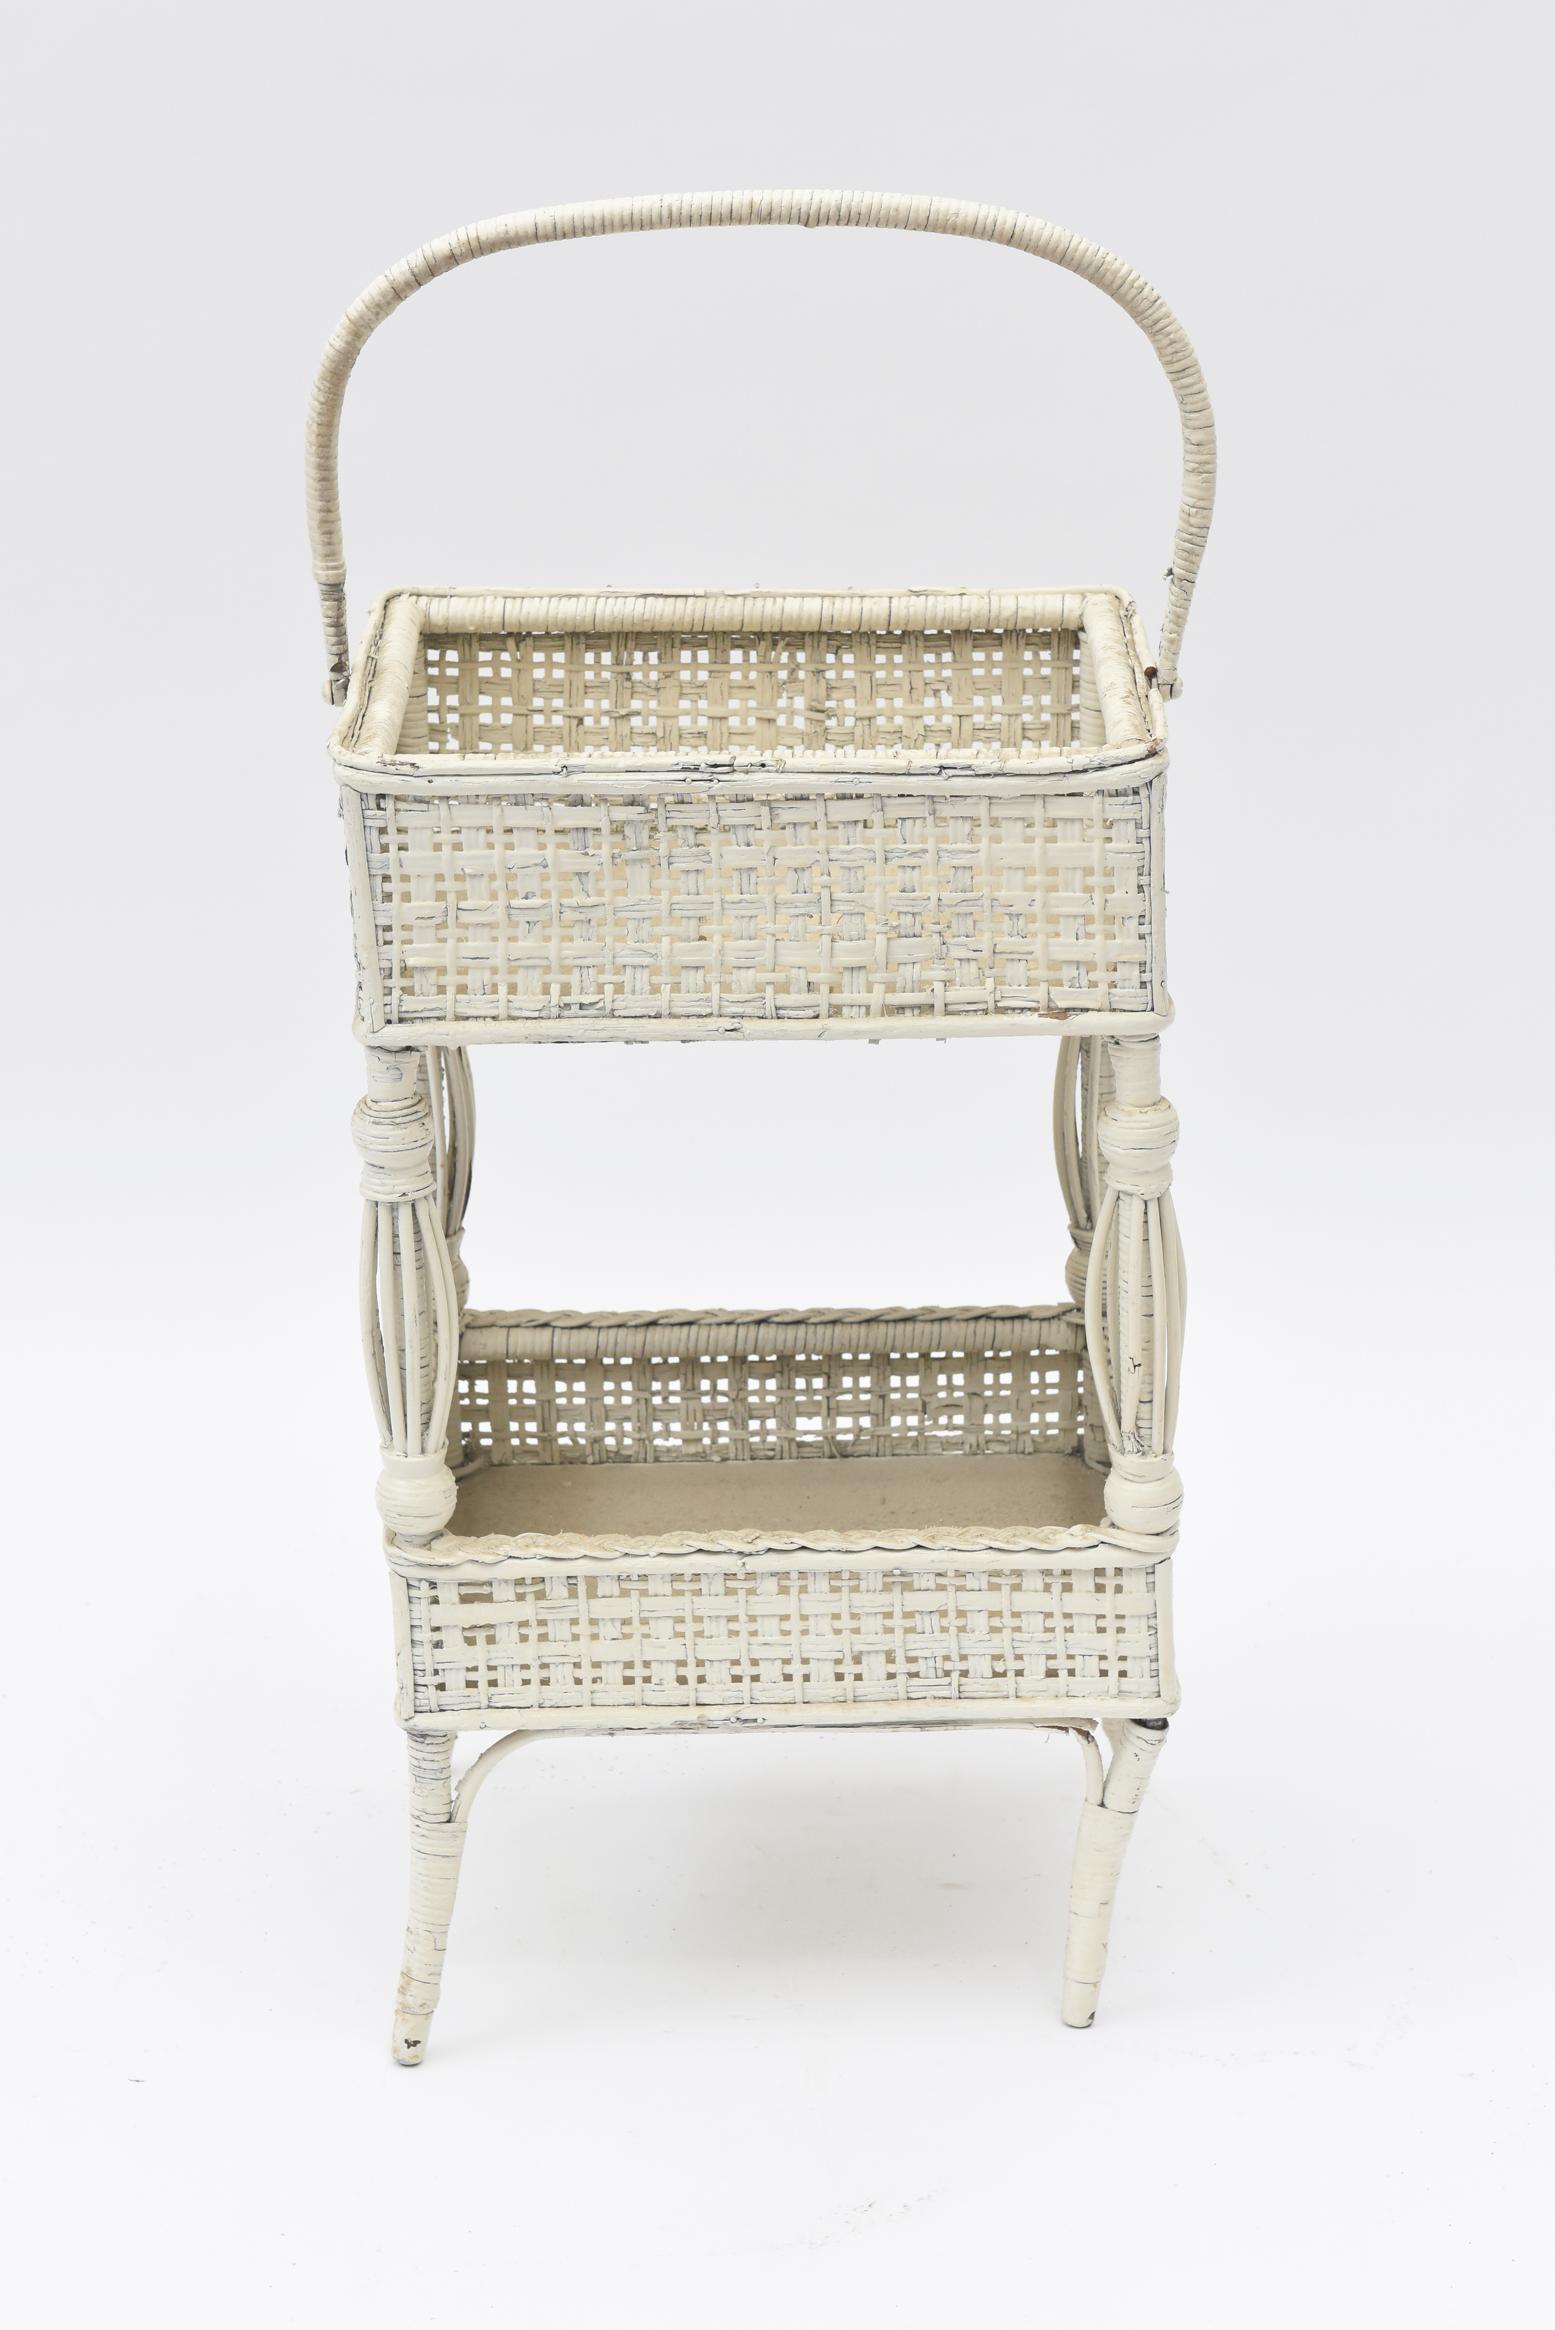 Birdcage legs typical of the late Victorian Era adorn this charming handled open sewing basket with its upper basket decorated with wicker loops on 3 of the 4 sides. The bottom basket is simple and can hold books, magazines or your current